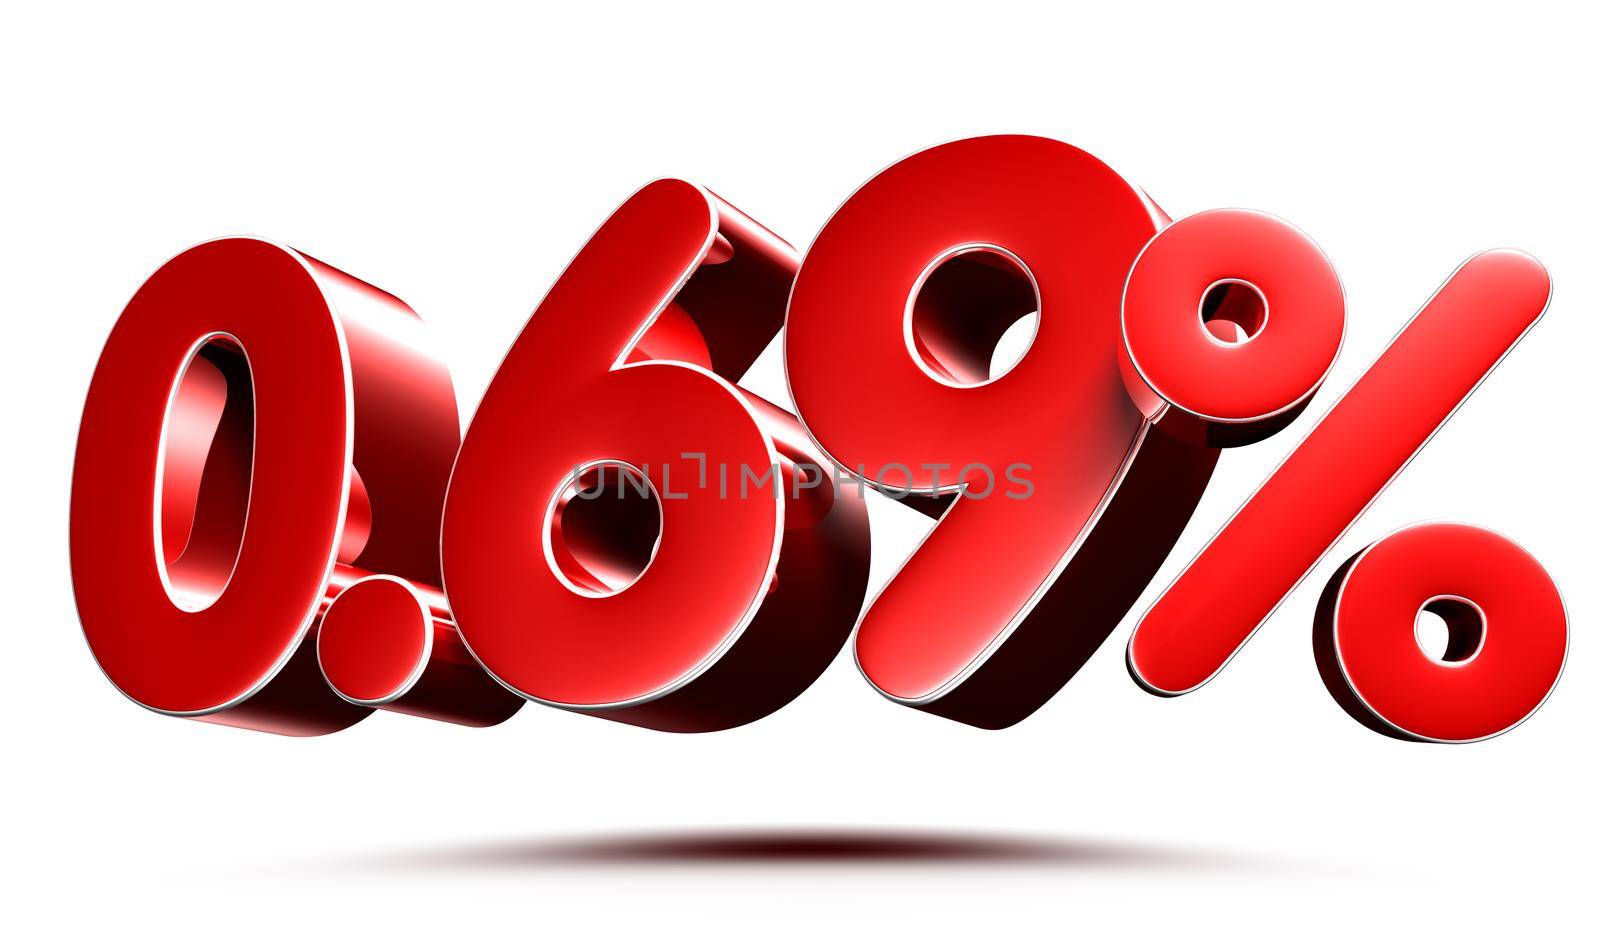 0.69 percent red on white background illustration 3D rendering with clipping path.